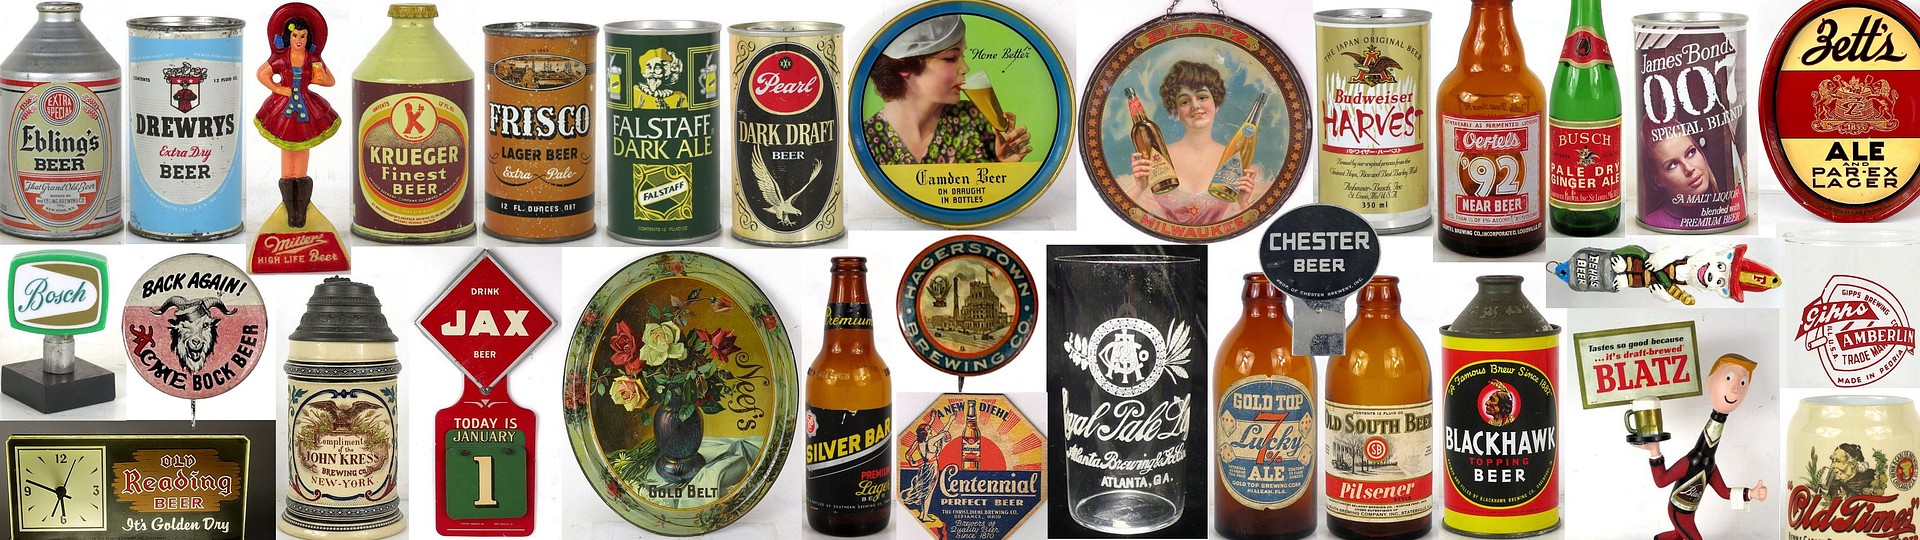 TavernTrove's Good Friday Beer Can and Breweriana Auction by TavernTrove